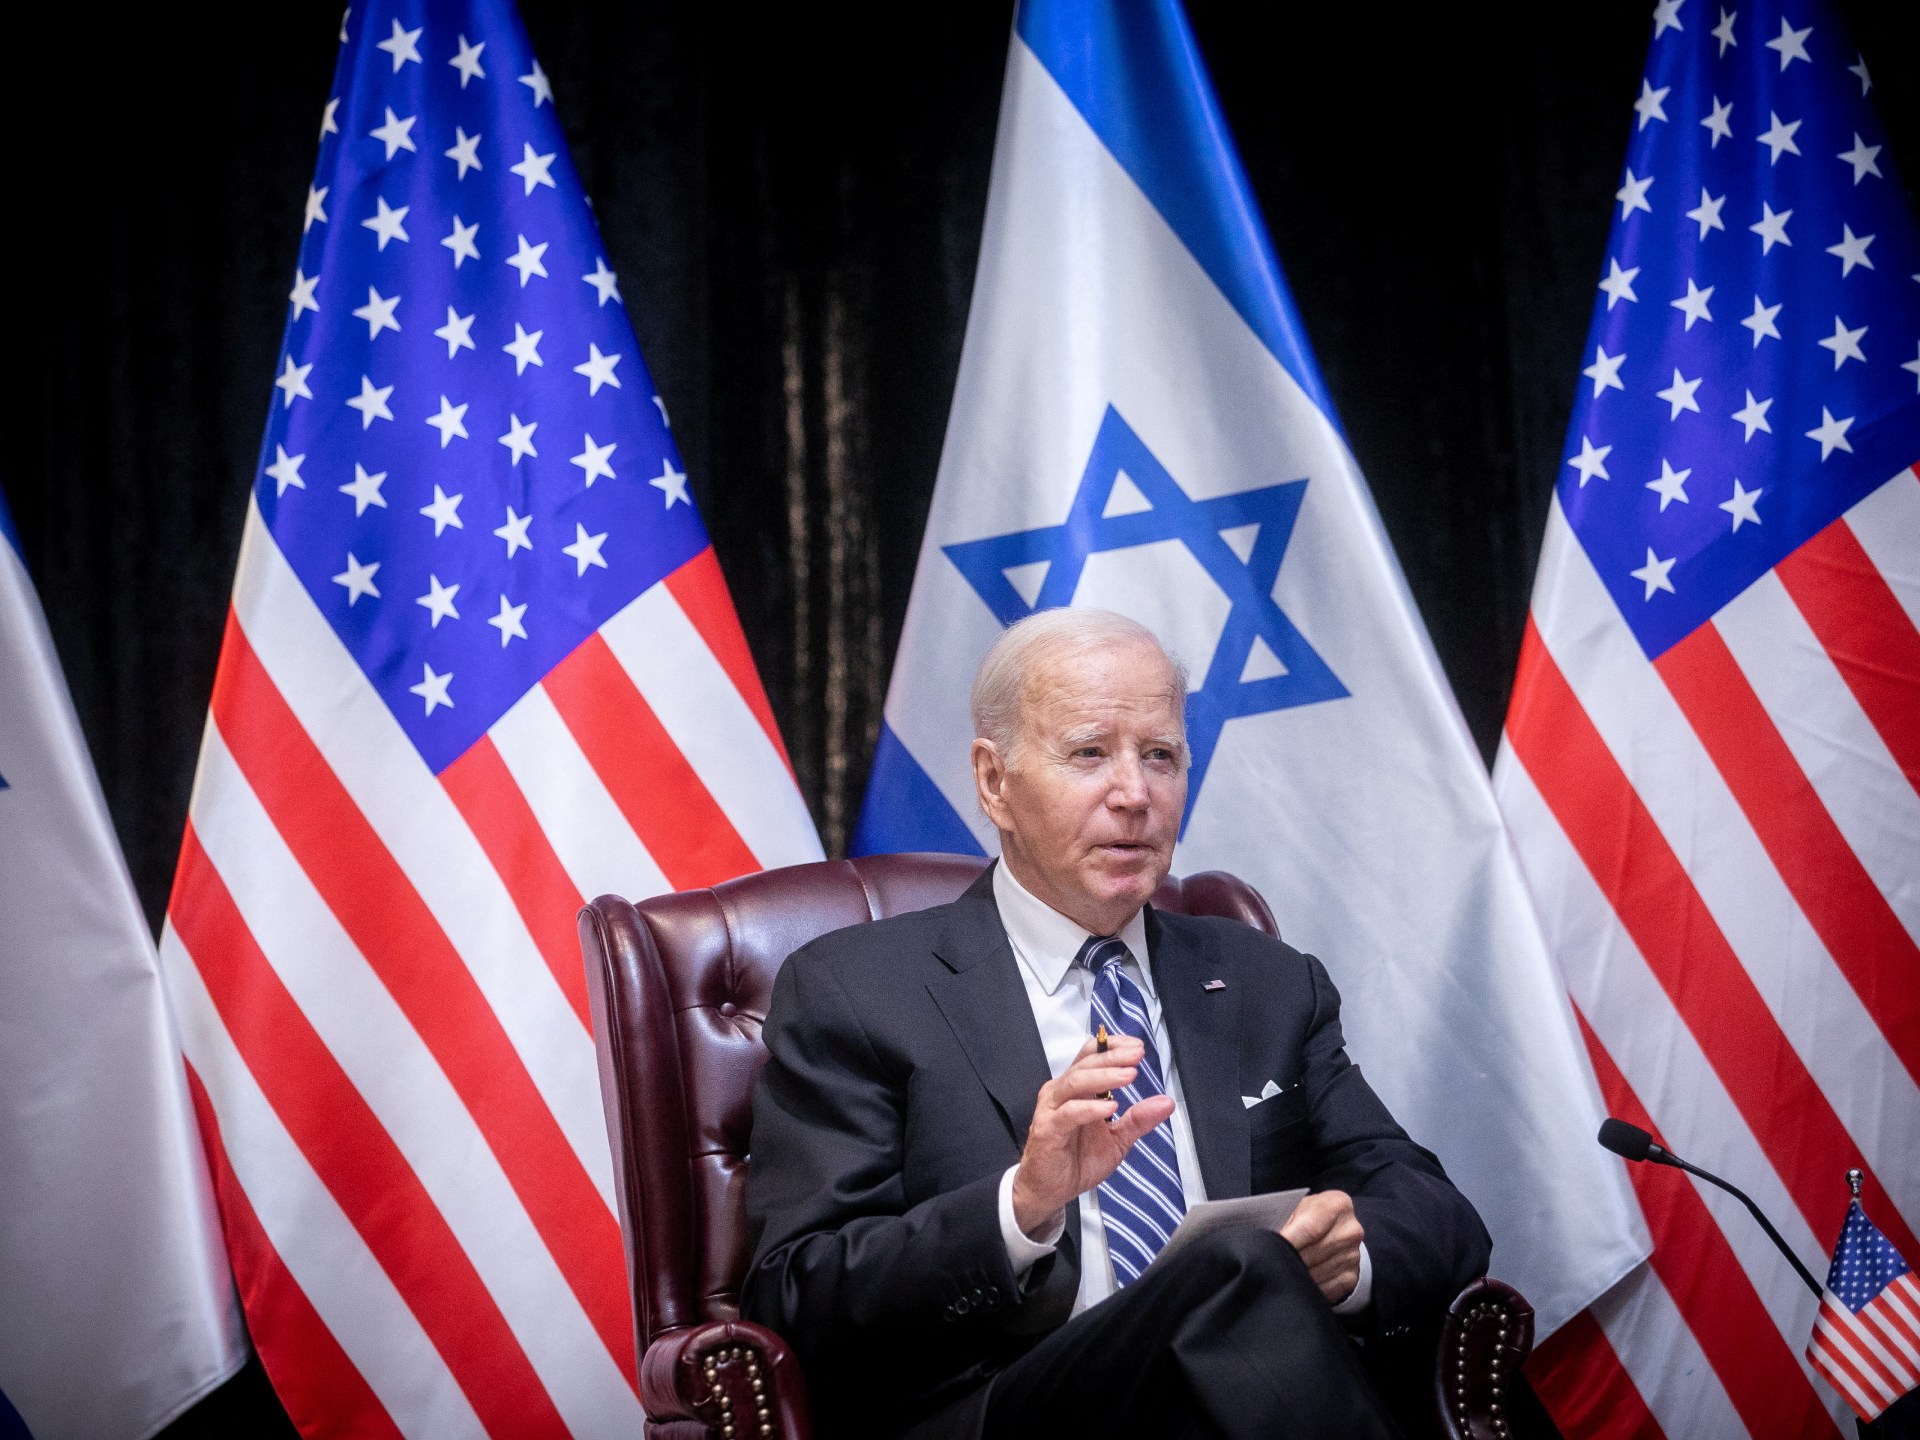 US action on a two-state solution in Israel-Palestine cannot wait | Israel-Palestine conflict